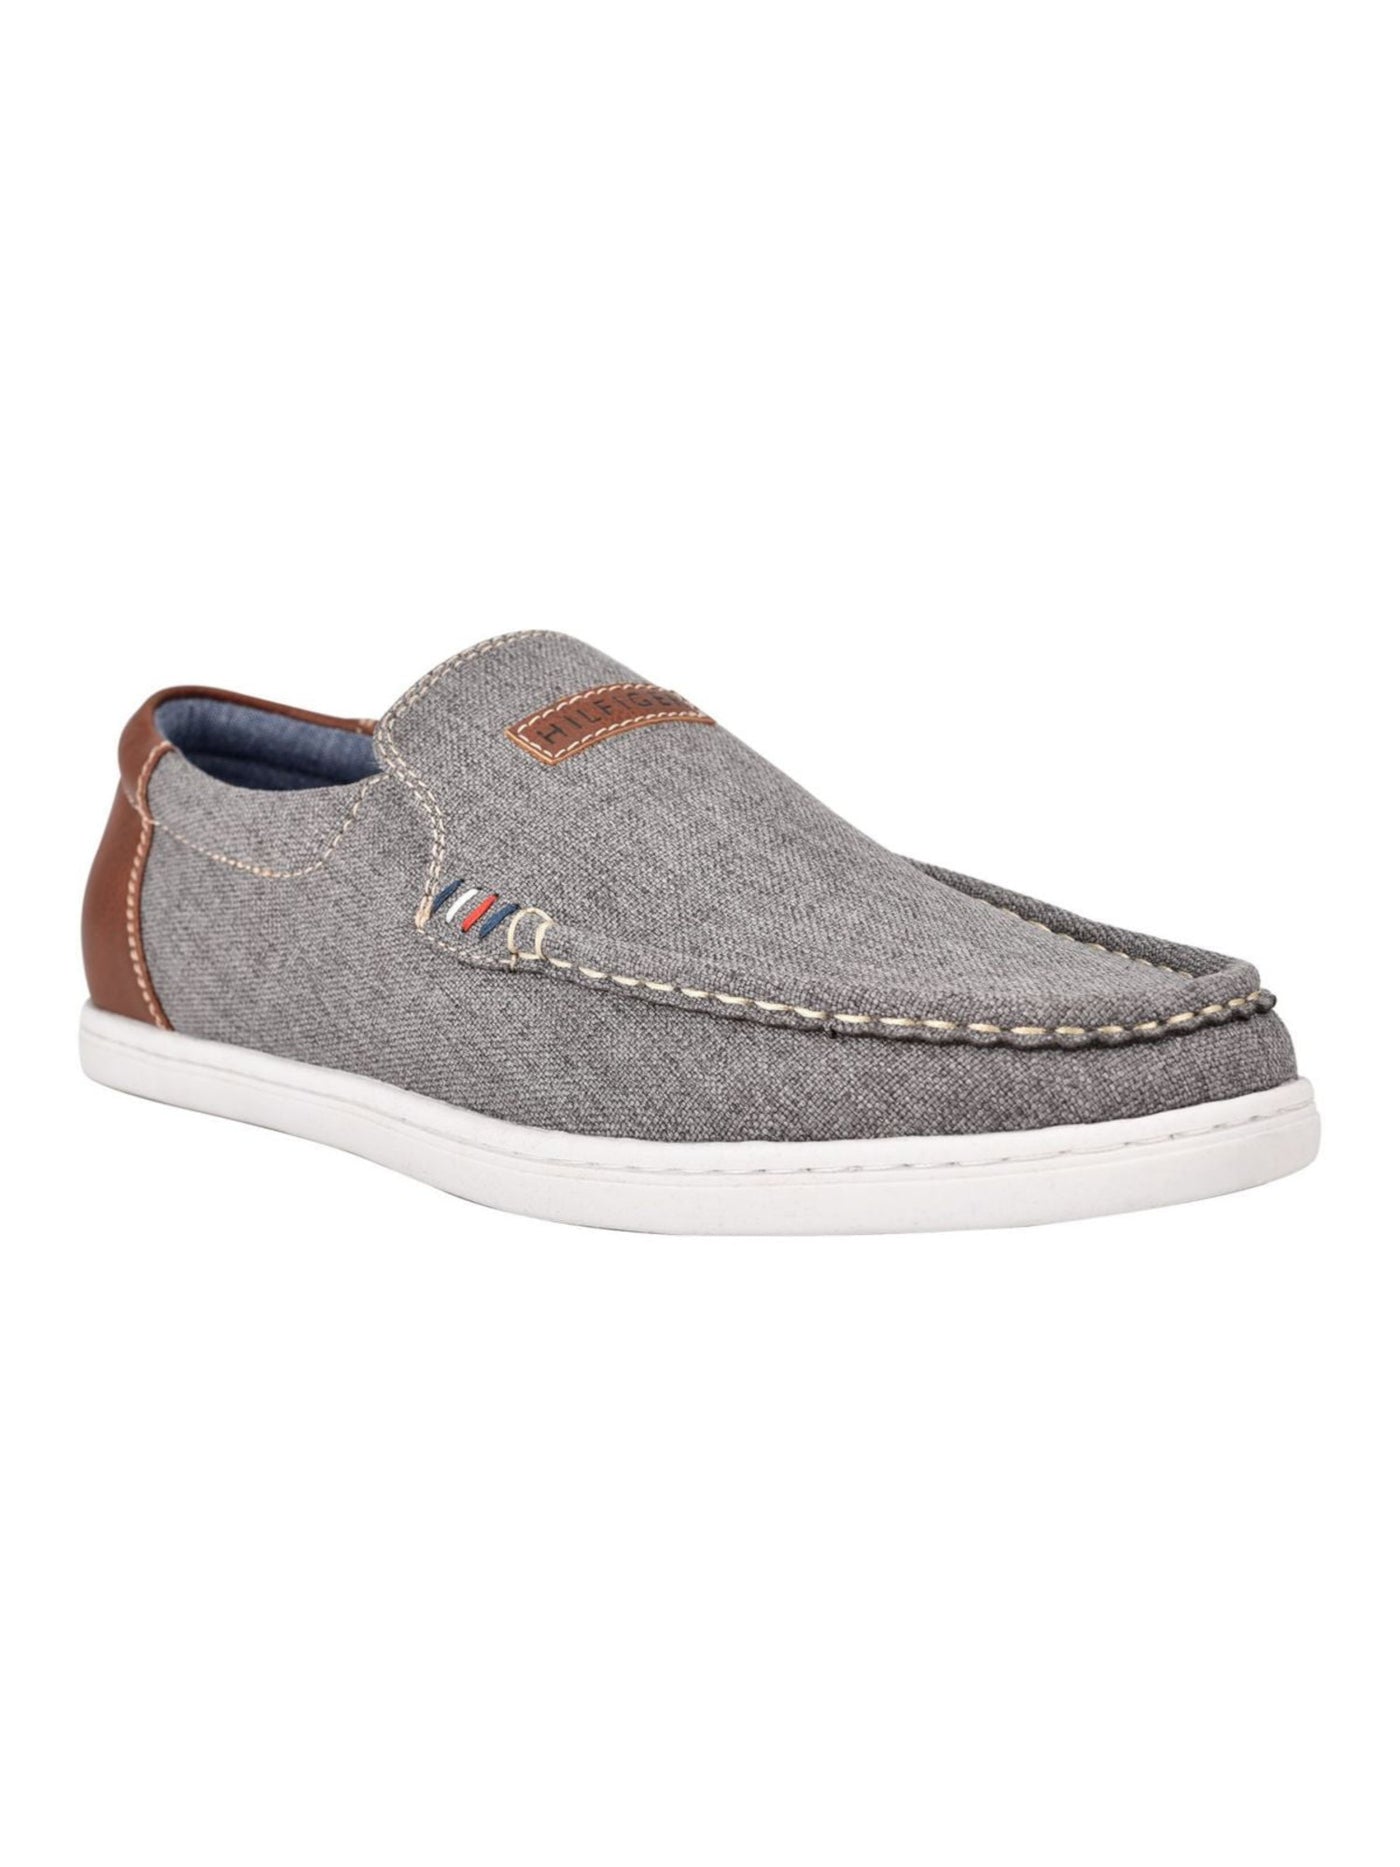 TOMMY HILFIGER Mens Gray Linen Cushioned Stretch Carlid Round Toe Slip On Sneakers Shoes 12 M